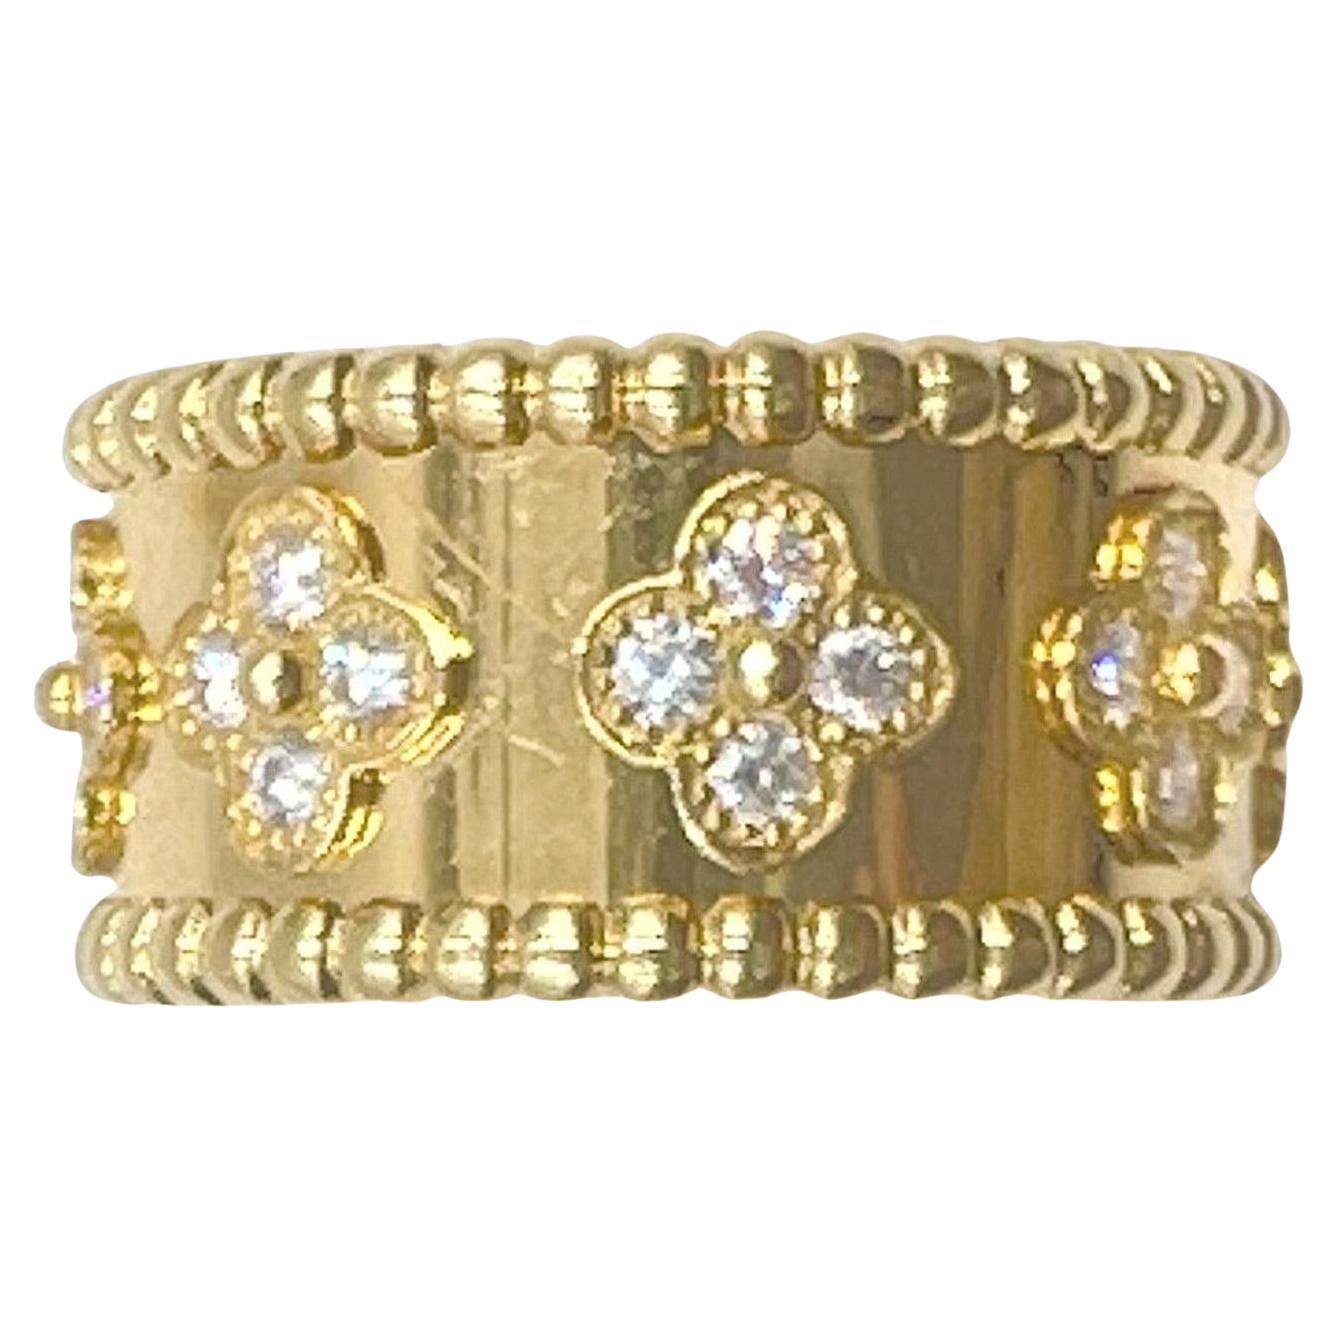 Van Cleef & Arpels medium-sized Perlée ring in polished 18k gold with beaded borders accented by eight mini clover cluster motifs set with thirty-two round full-cut diamonds weighing approximately 0.71 total carats (E-F color, VVS1-VVS2 clarity). 